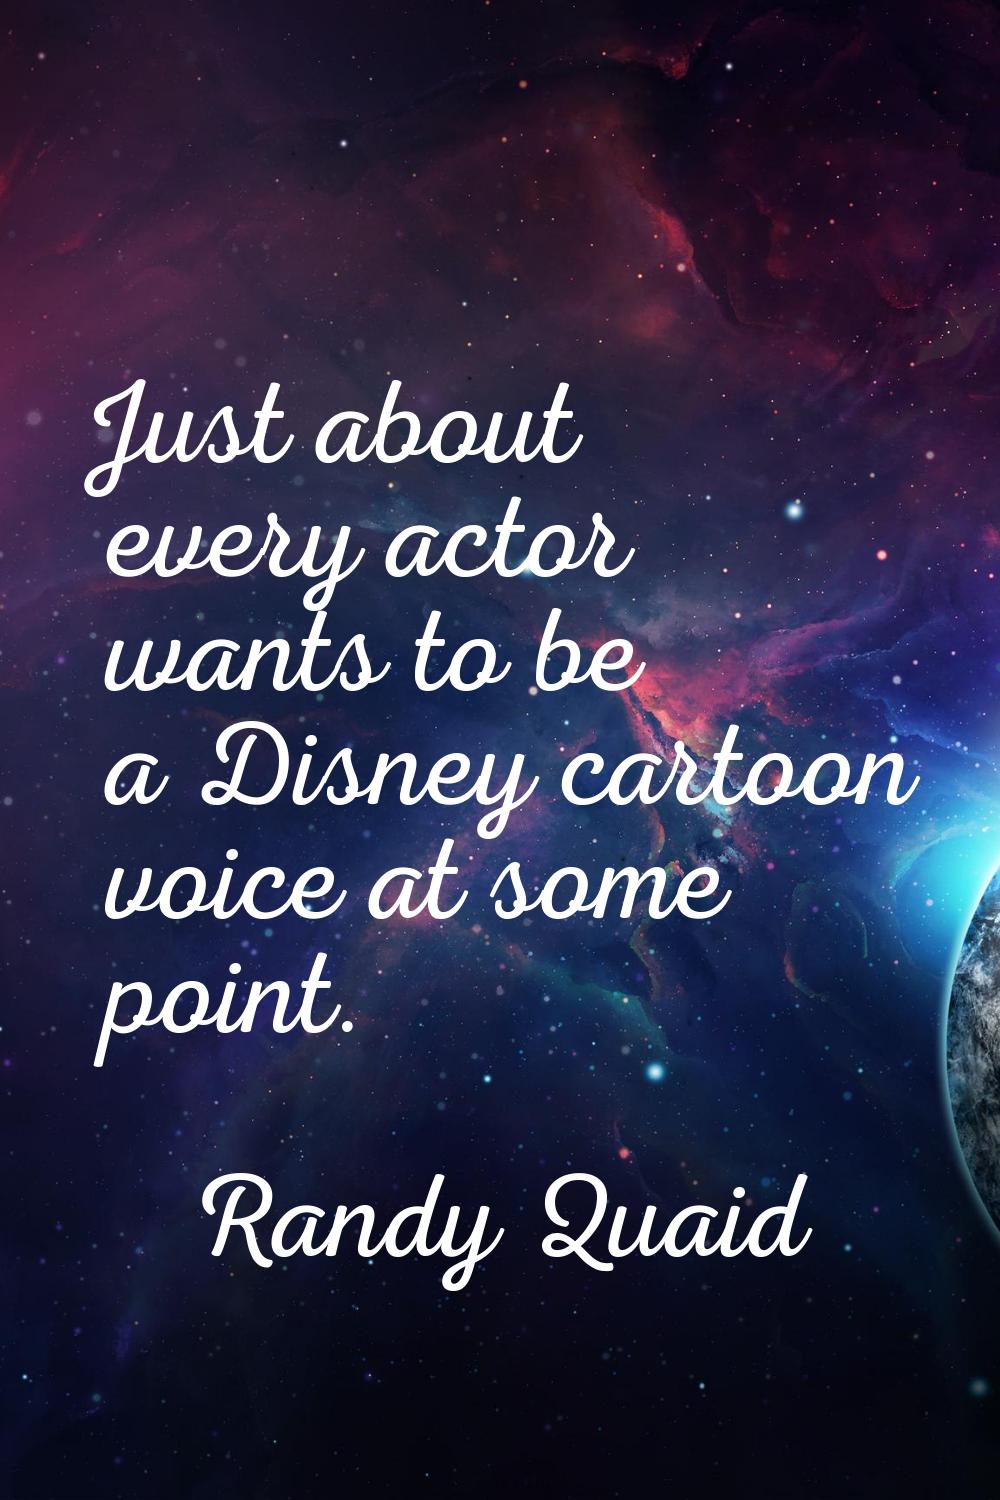 Just about every actor wants to be a Disney cartoon voice at some point.